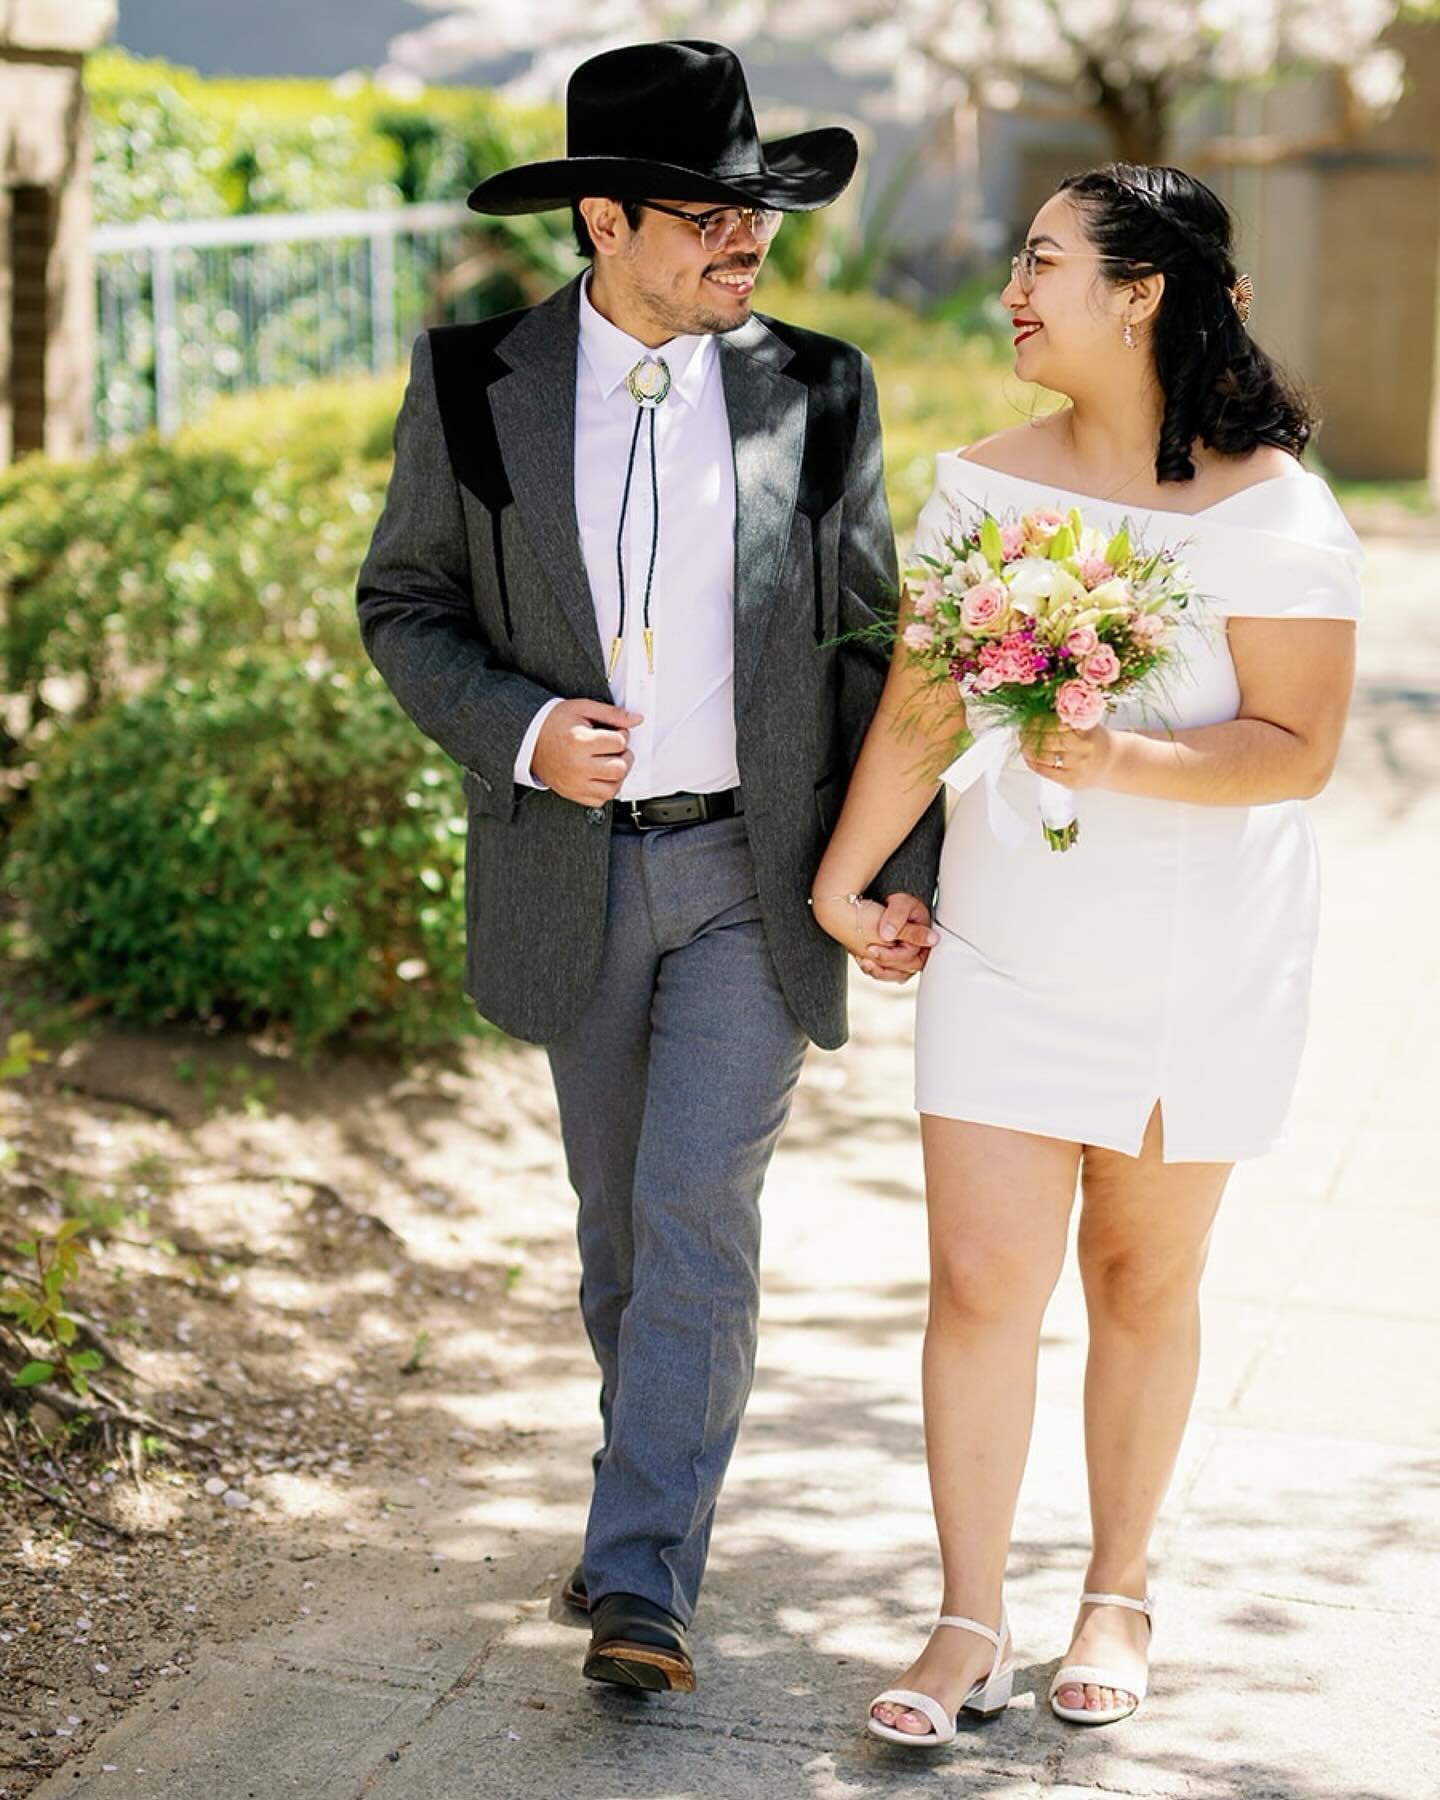 Angela &amp; Adrian were such a fun couple to celebrate with at the Wake County Justice Center - from Angela&rsquo;s beautiful bouquet, to the incredible silhouette of Adrian&rsquo;s hat, I loved photographing these two. 

My favorite detail of the d